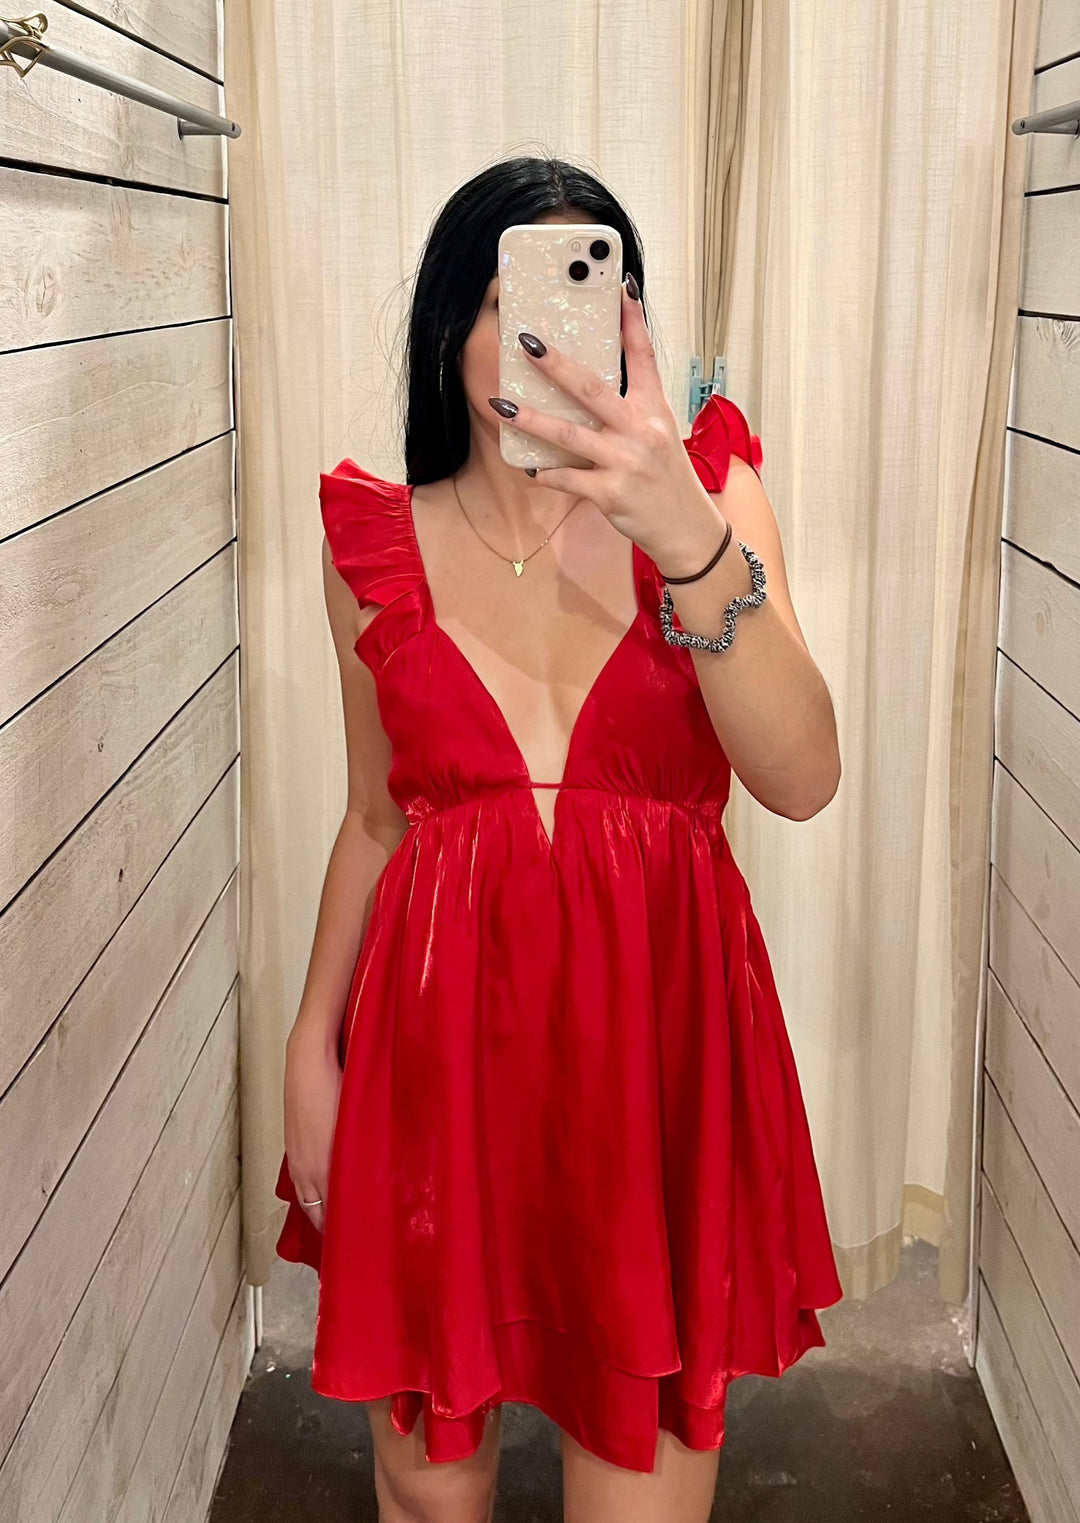 All The Things Dress, Dresses, Adeline, Adeline, dallas boutique, dallas texas, texas boutique, women's boutique dallas, adeline boutique, dallas boutique, trendy boutique, affordable boutique